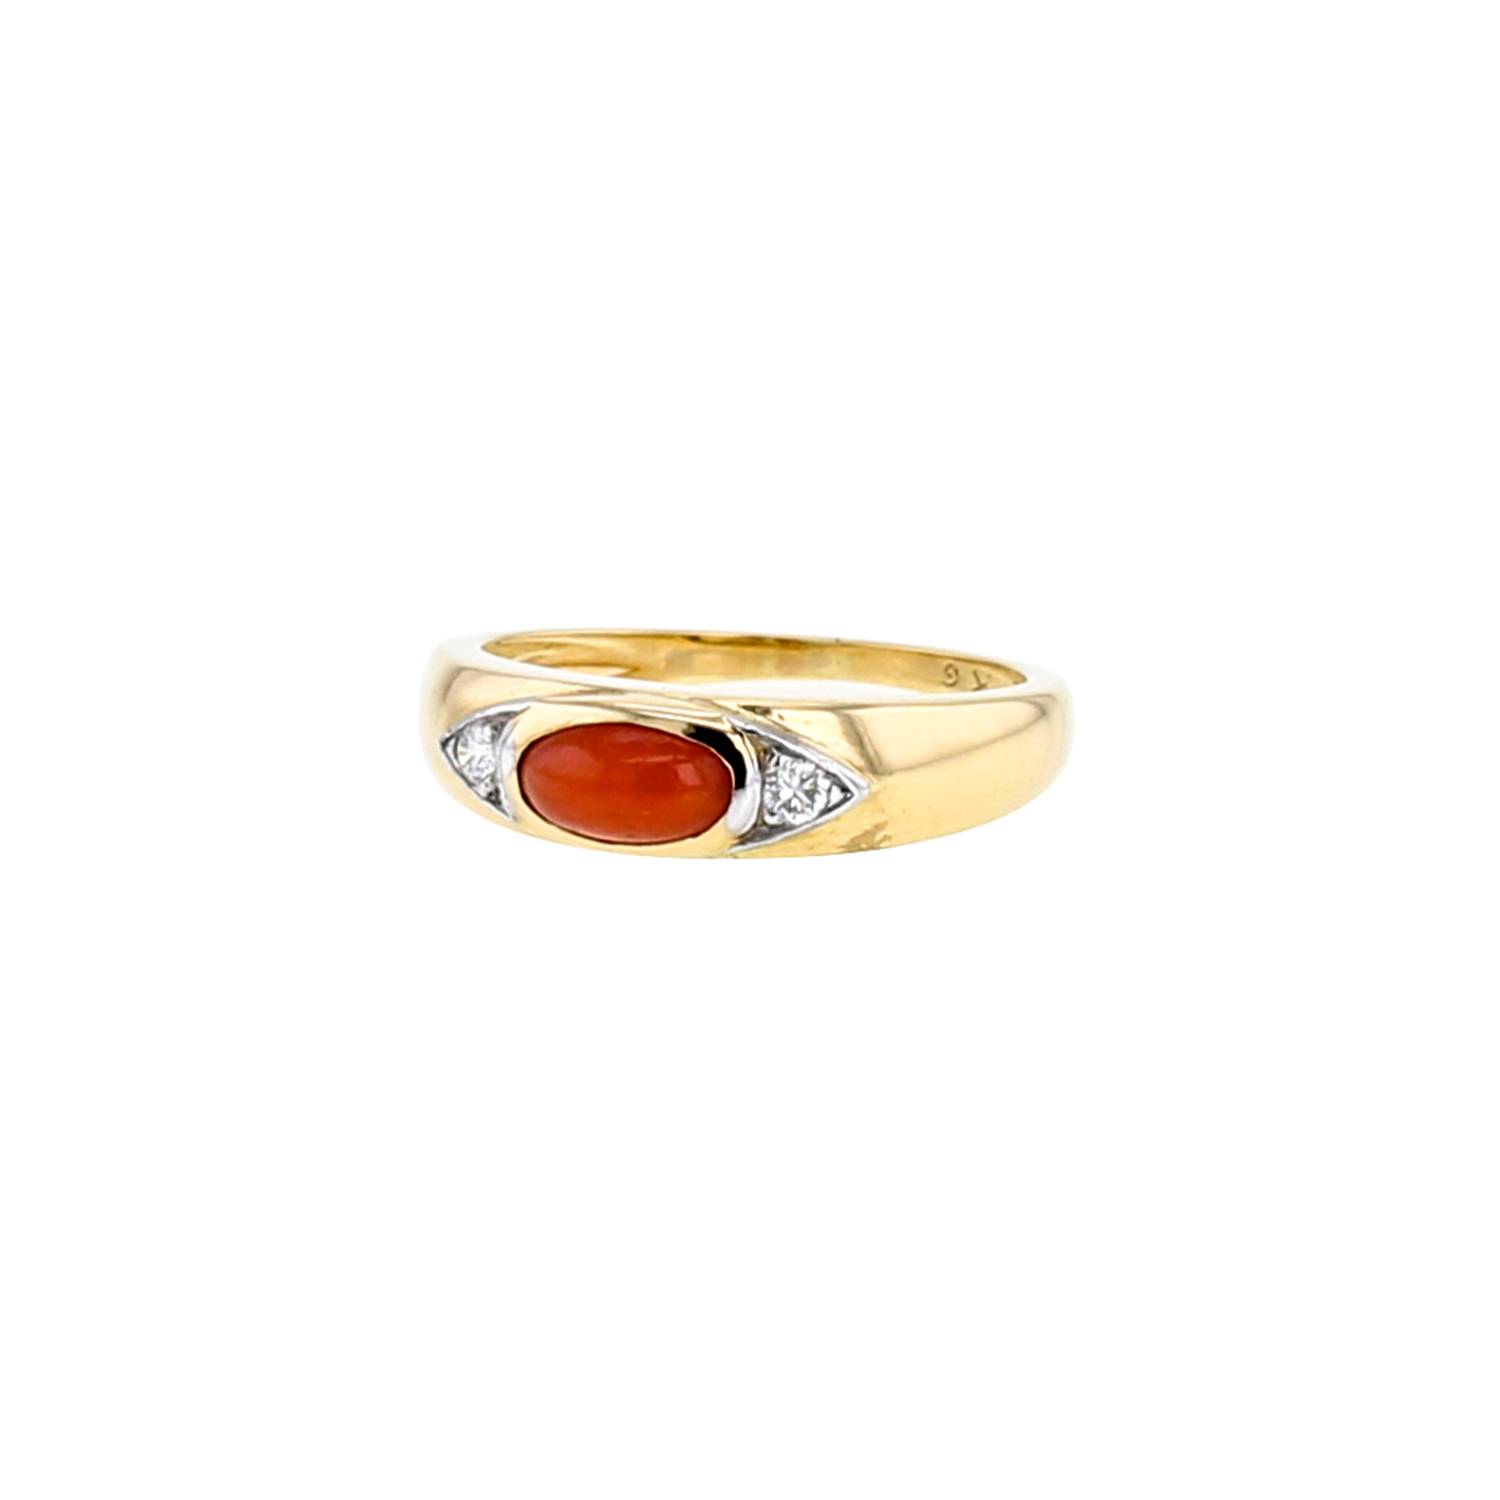 Ring In Yellow , Platinum, Coral And Diamonds